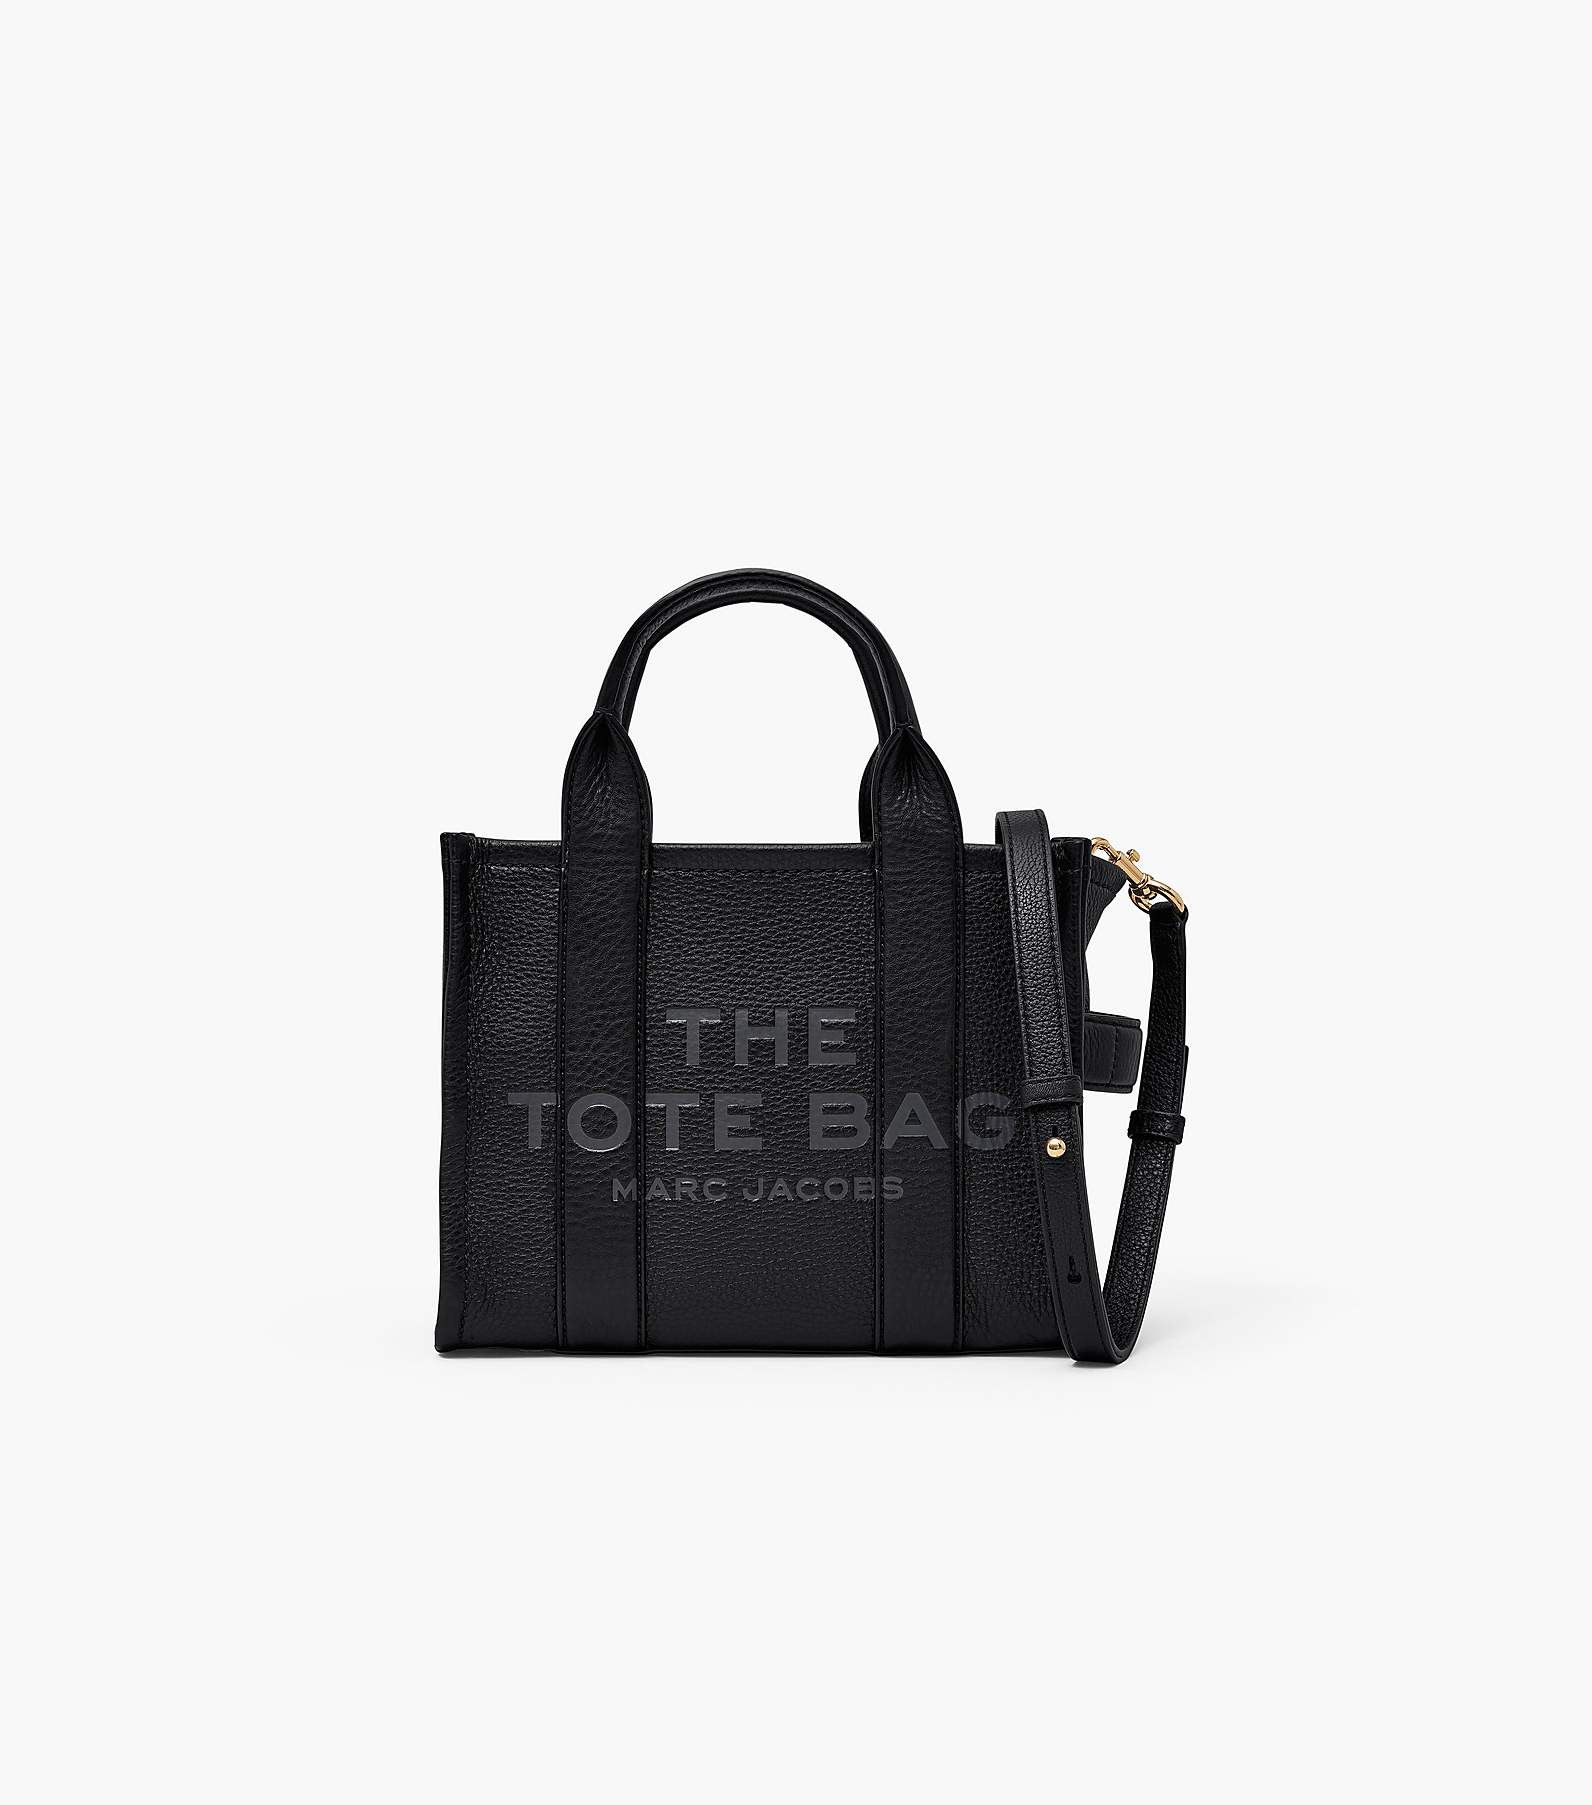 MARC JACOBS トートバッグ スモール THE COLOR BLOCK